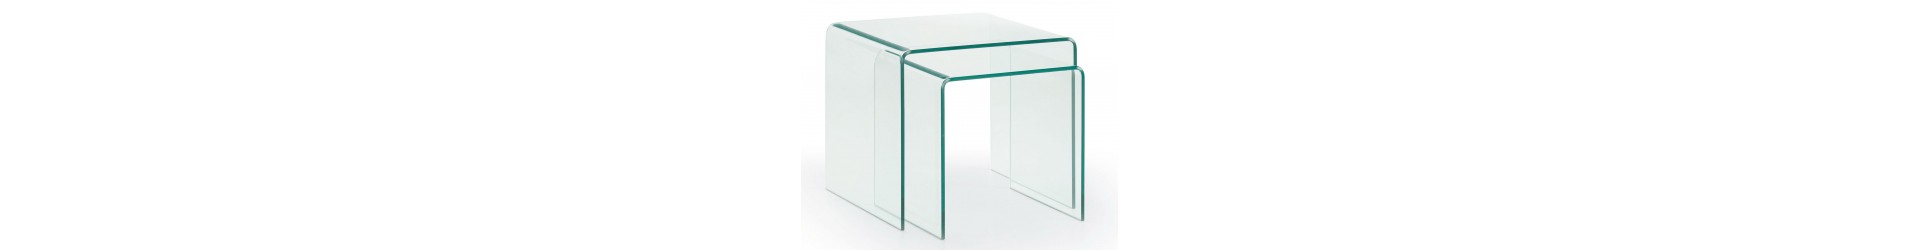 COFFEE TABLES